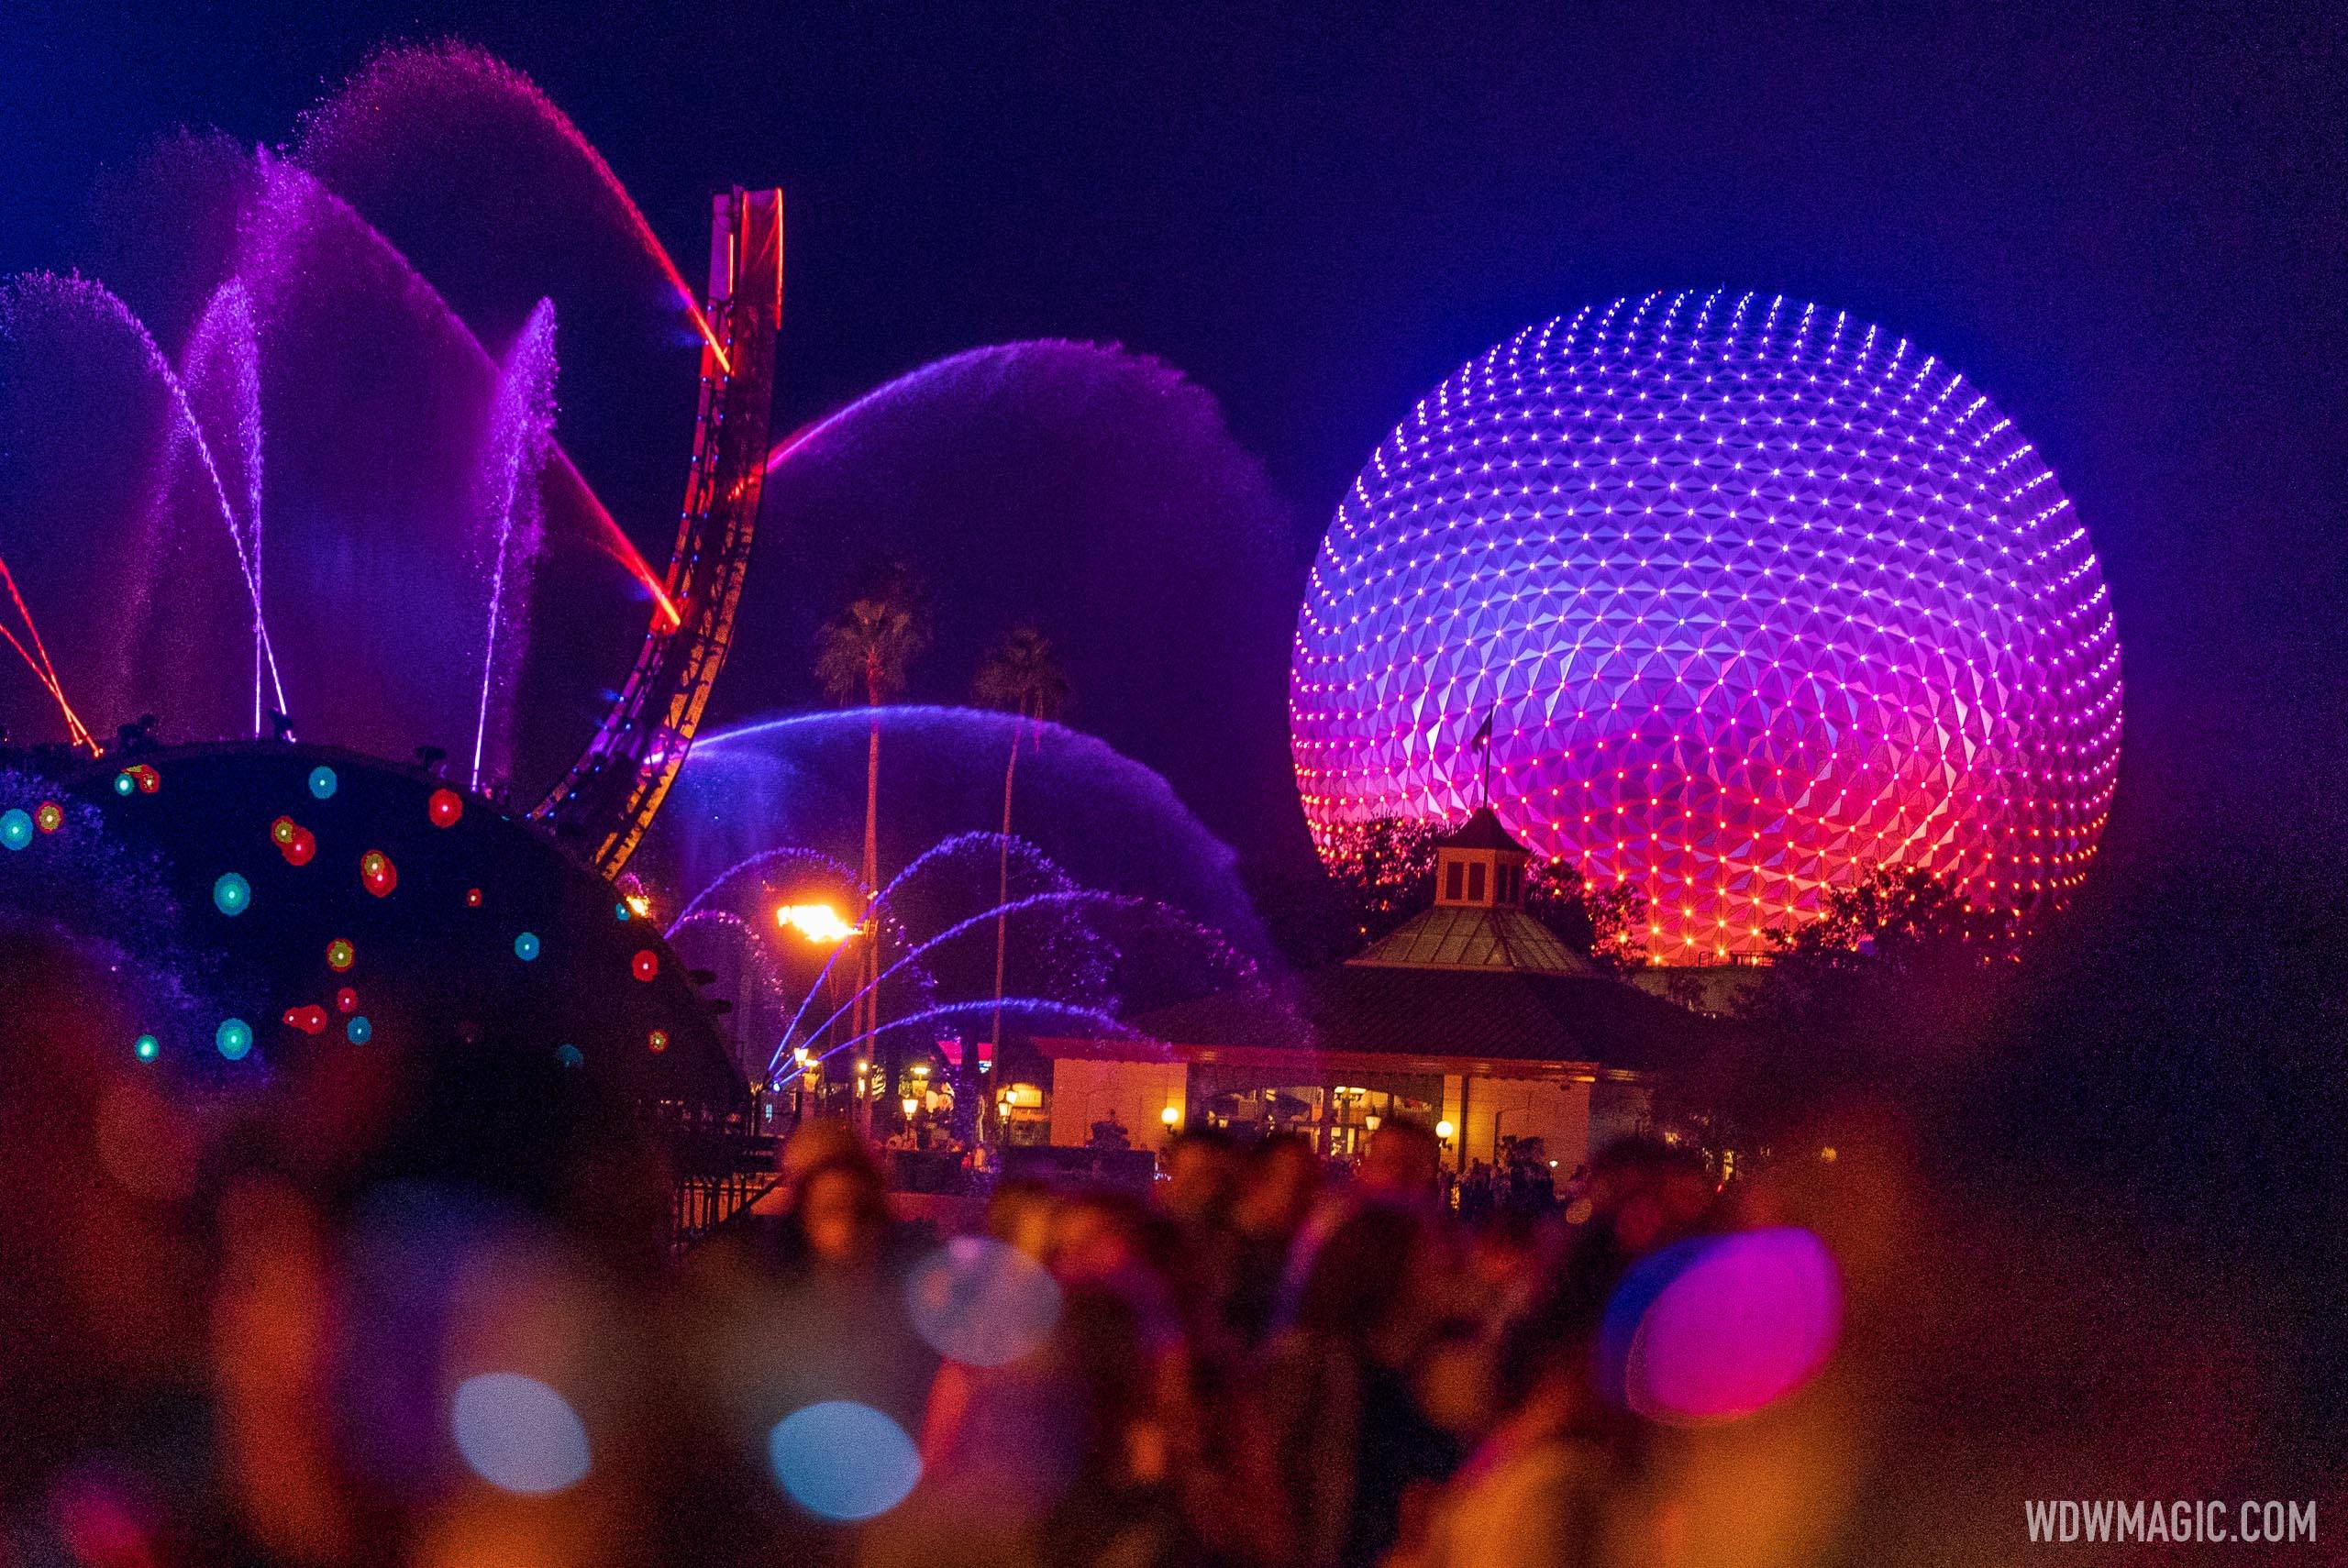 Spaceship Earth new lighting design with points of light